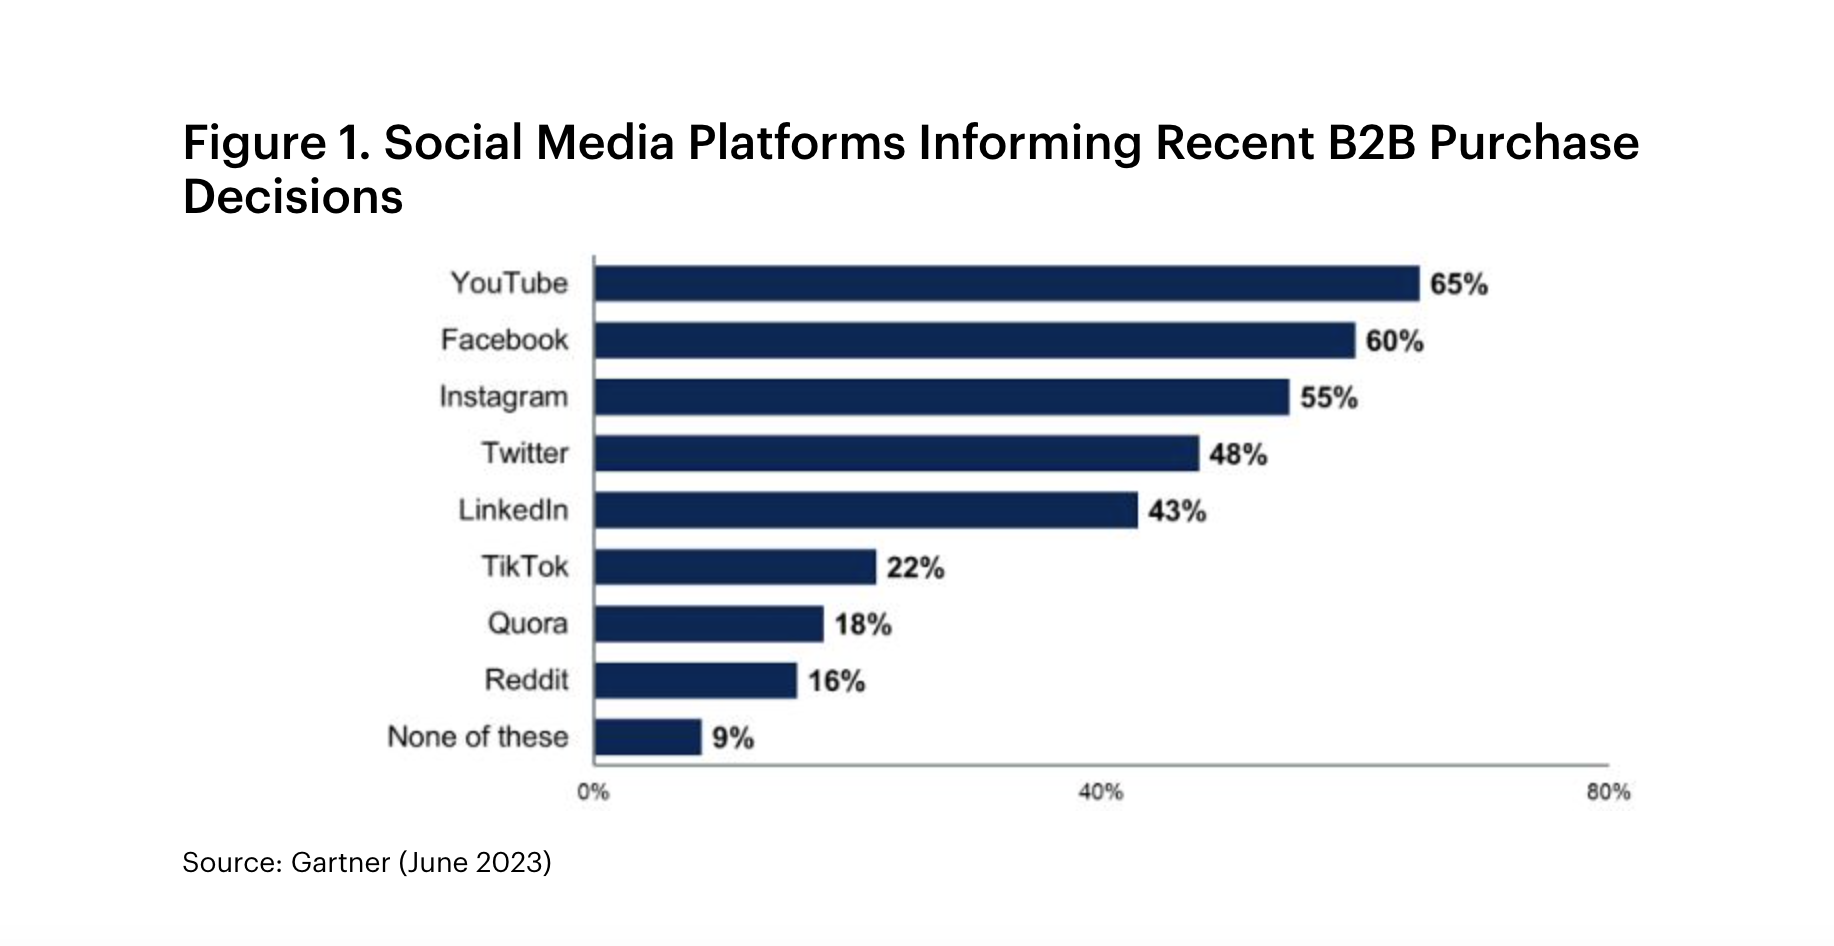 Figure from Gartner June 2023. Title: Social Media Platforms Informing Recent B2B Purchase Decisions. The top channels are YouTube (65%), Facebook (60%), Instagram (55%), X (48%), and Linkedin (43%). 